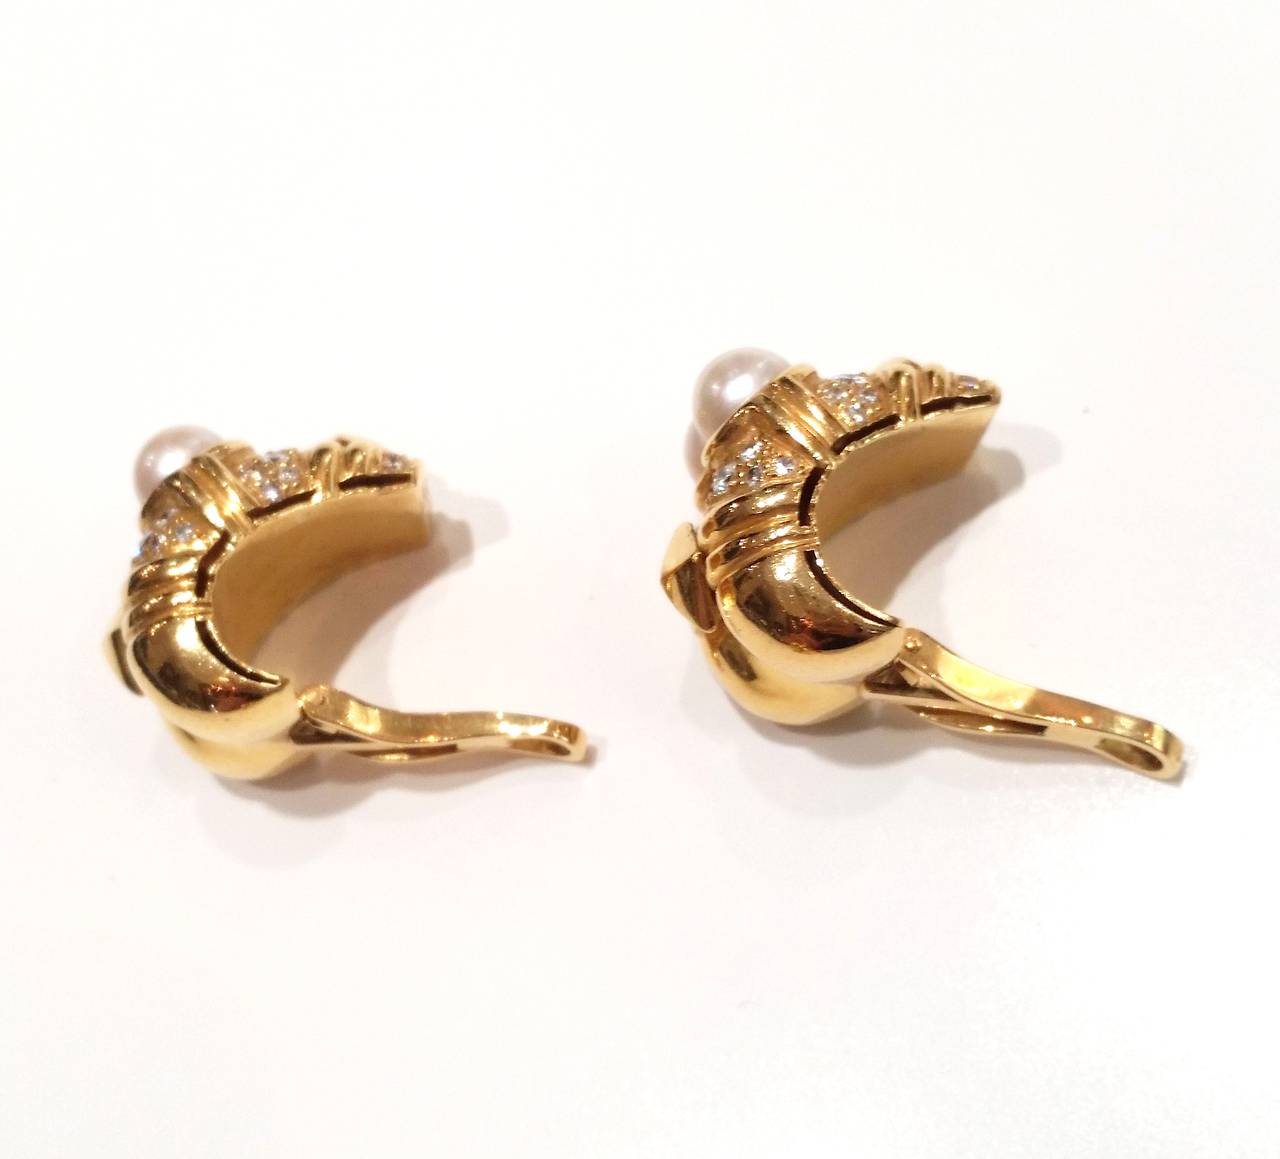 Women's Pearl Diamond Gold Earrings and Ring Suite